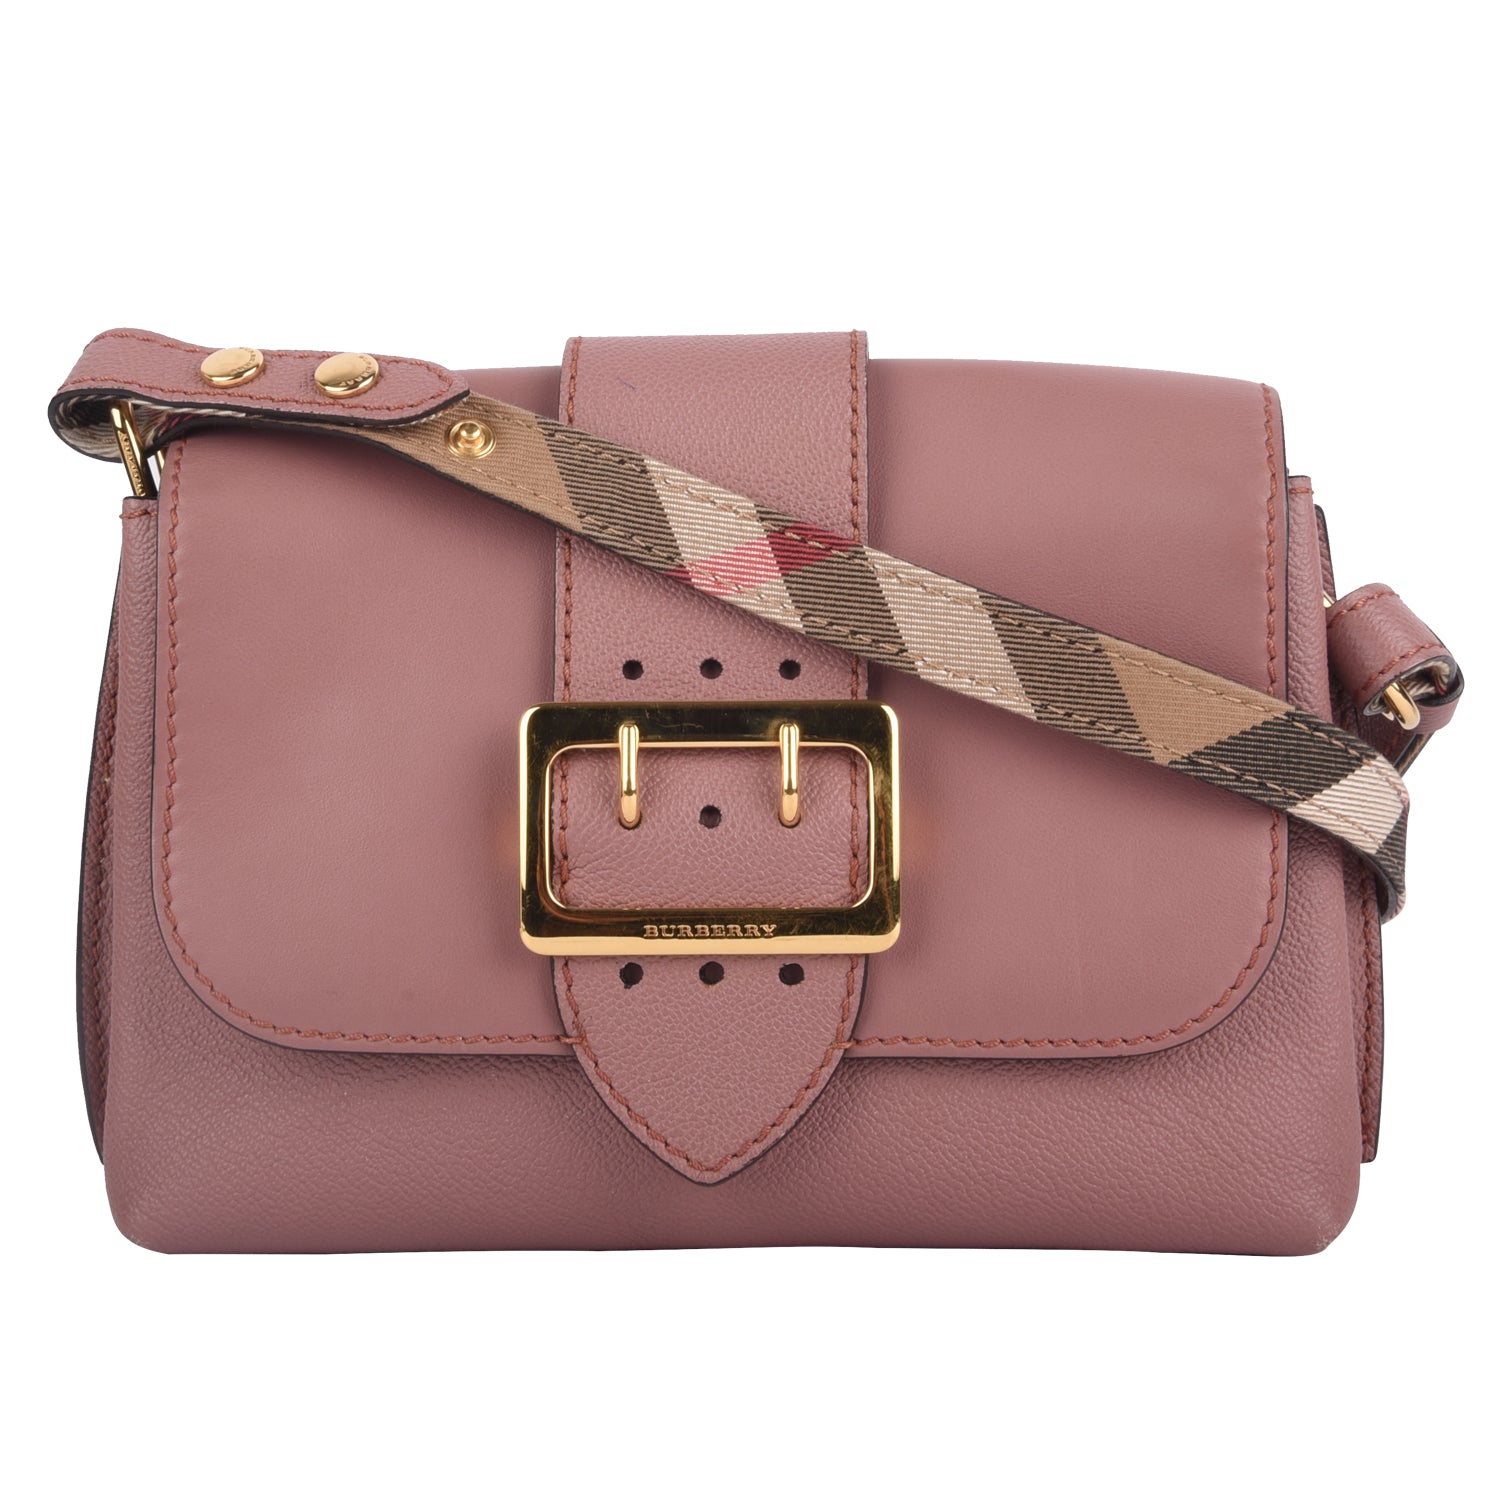 Burberry Dusty Pink Grain Leather Bag